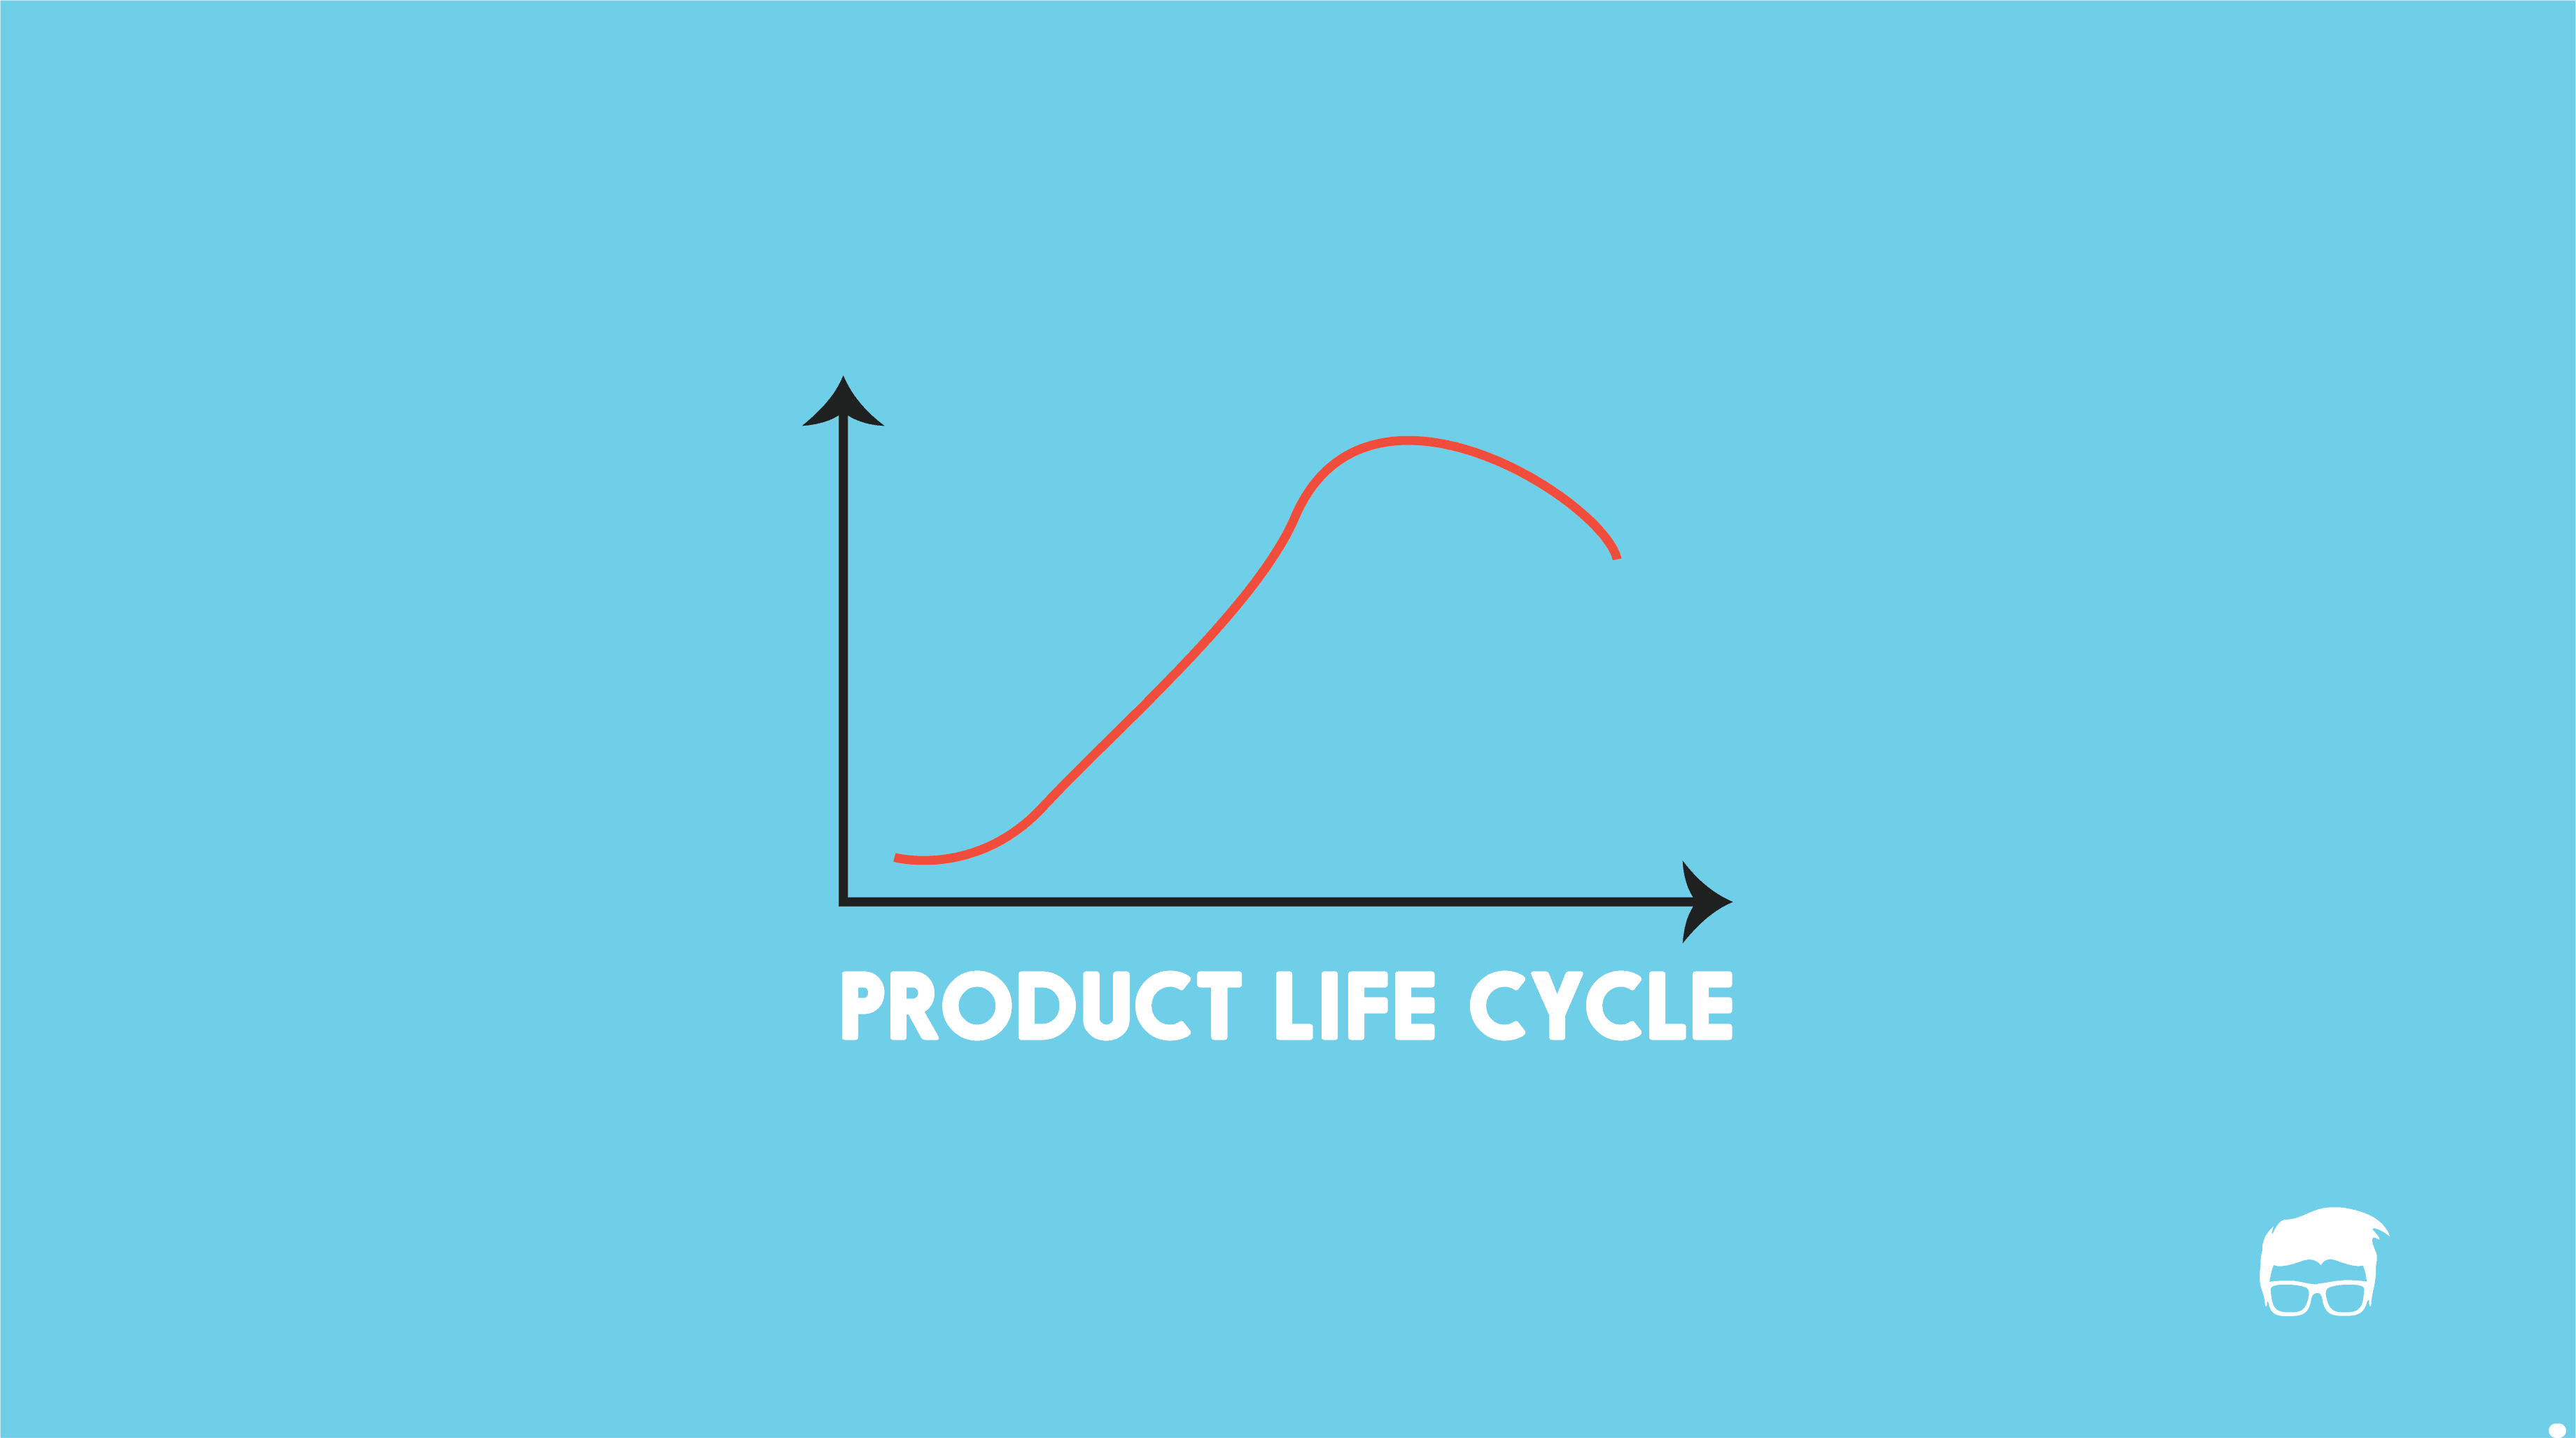 Product Life Cycle - 4 Stages of Product's Life